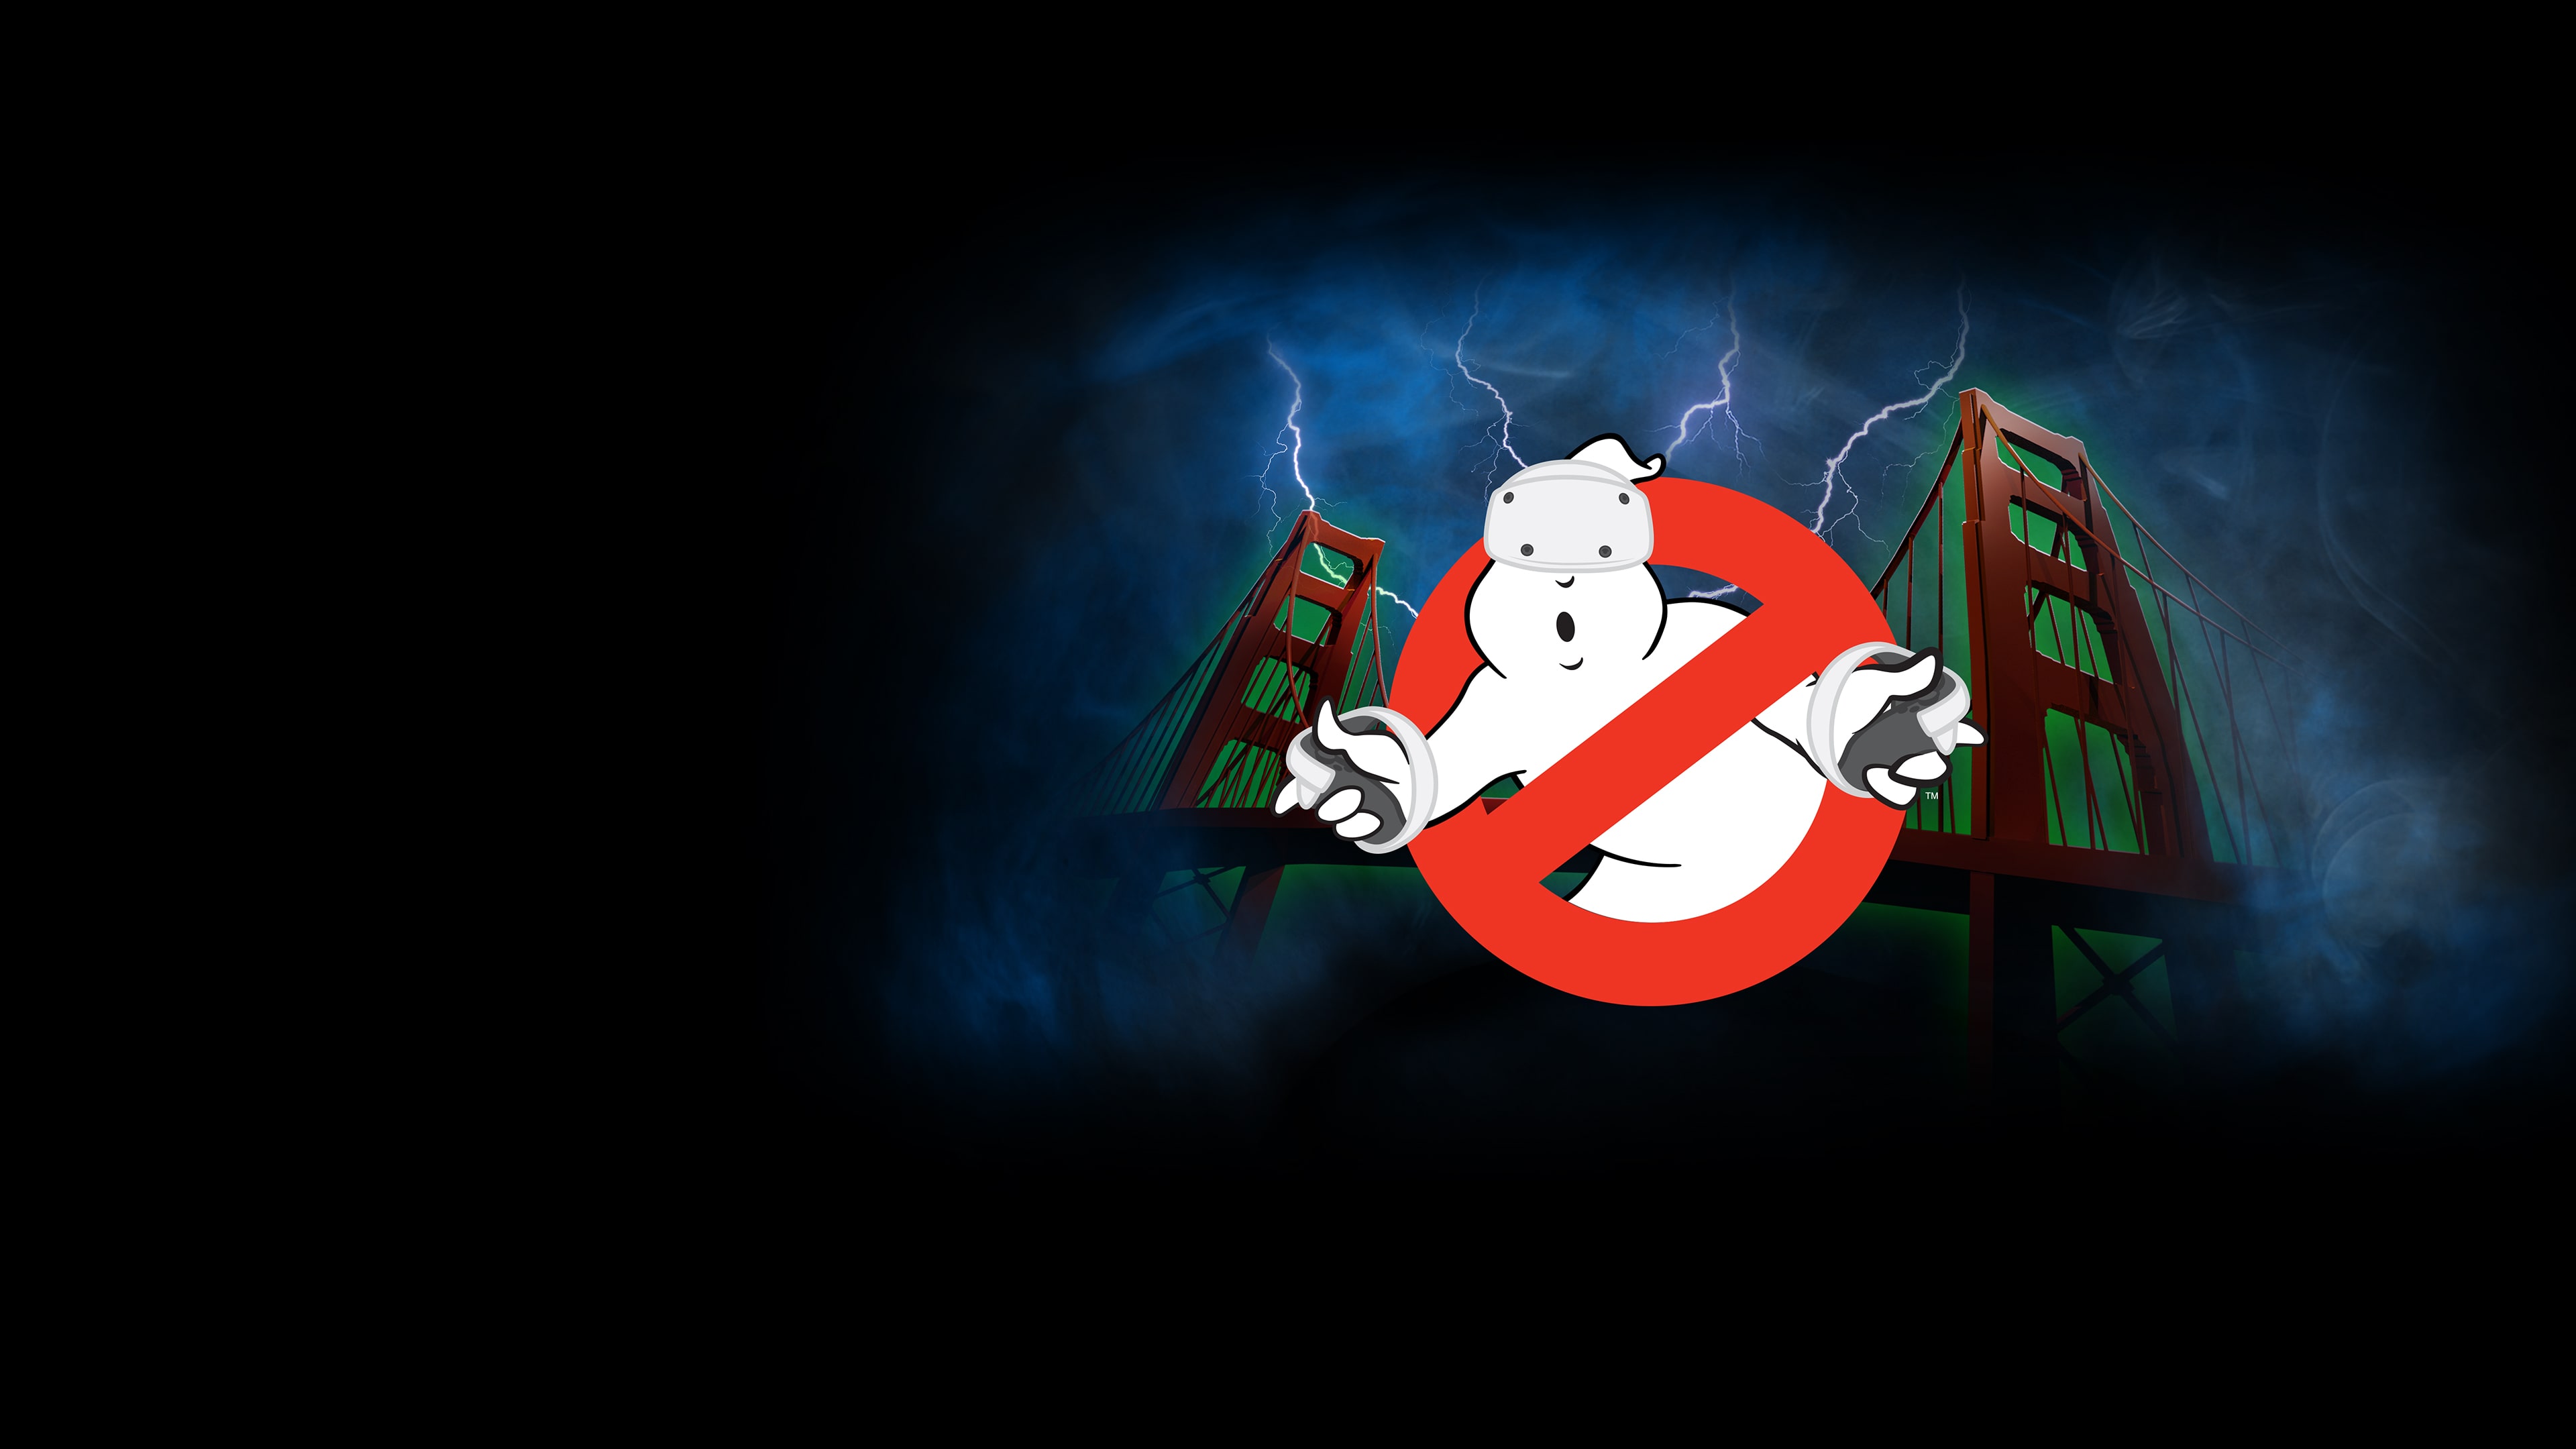 Ghostbusters: Rise of the Ghost Lord (Simplified Chinese, English, Korean, Japanese, Traditional Chinese)